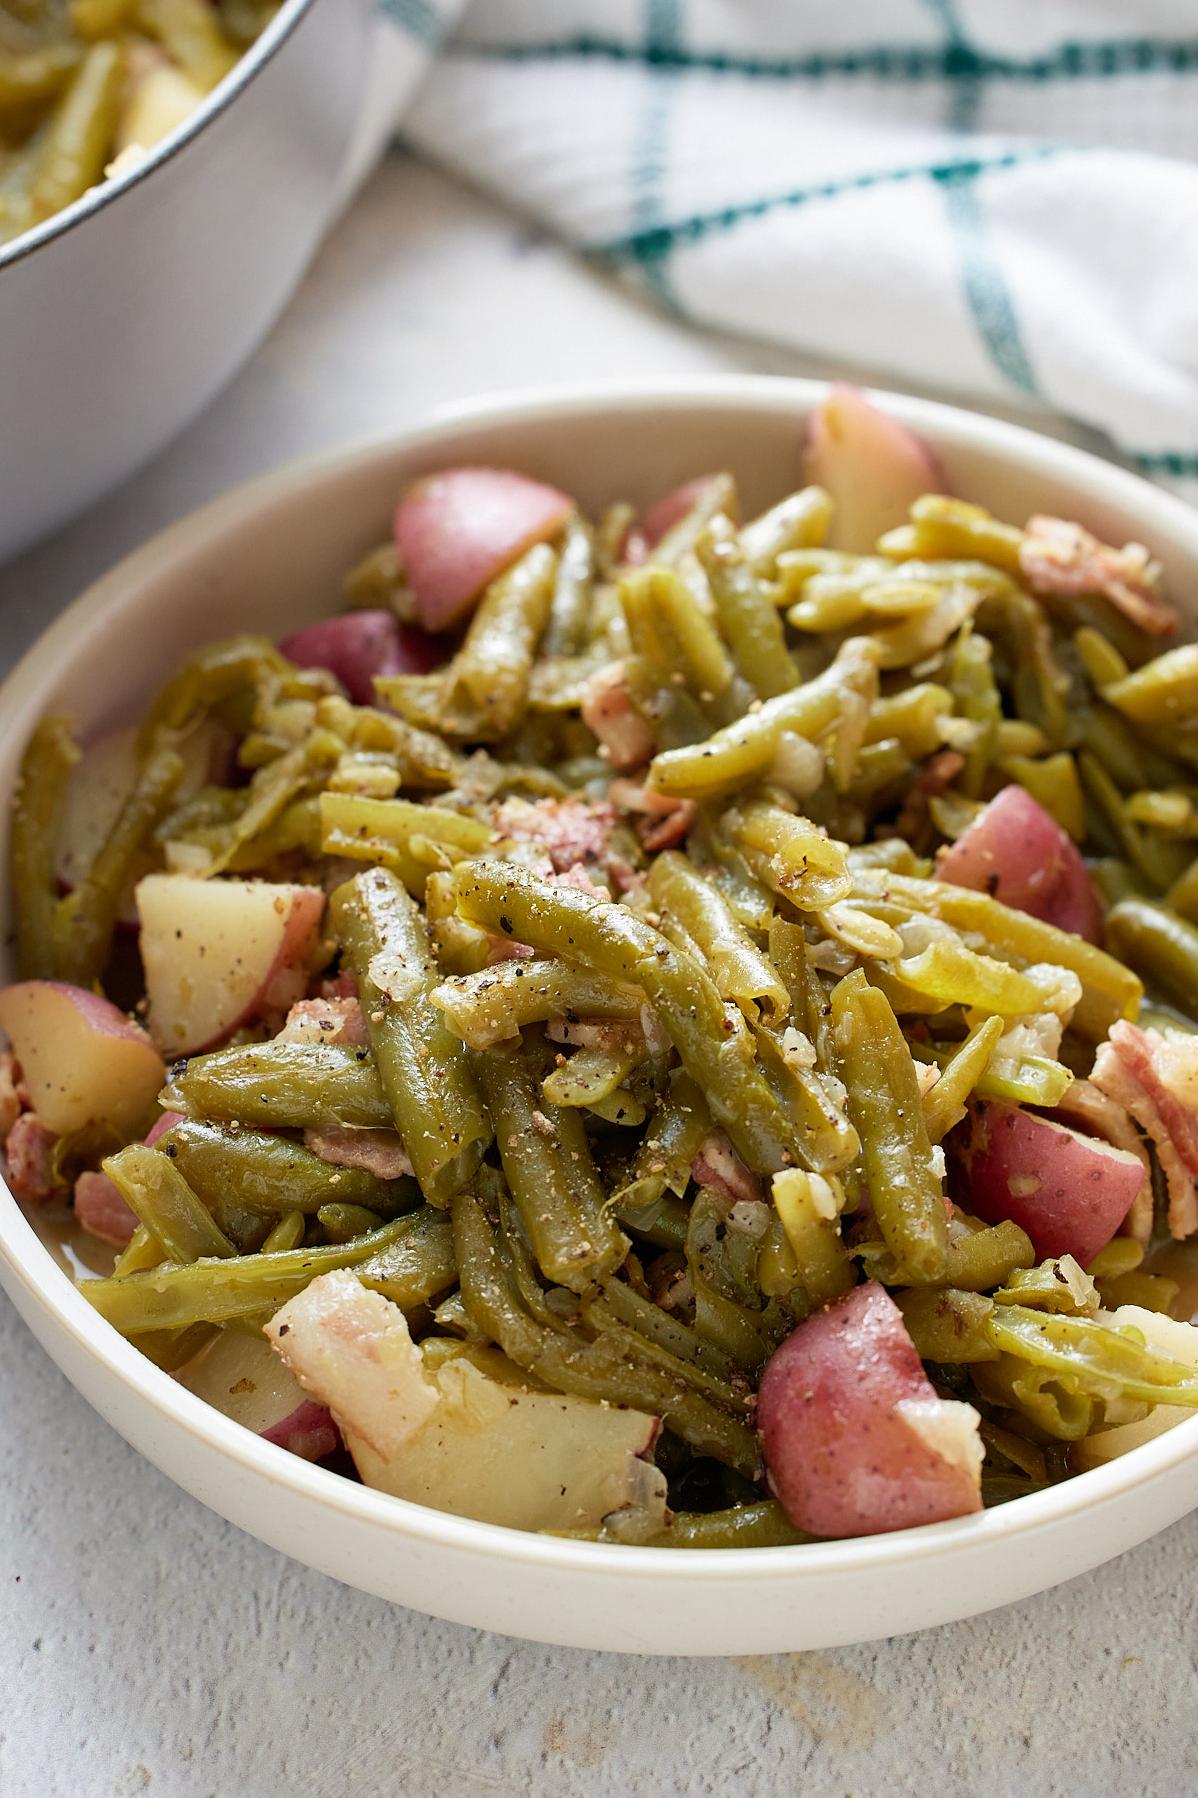  Bring the taste of the south to your dinner table with this delicious dish.